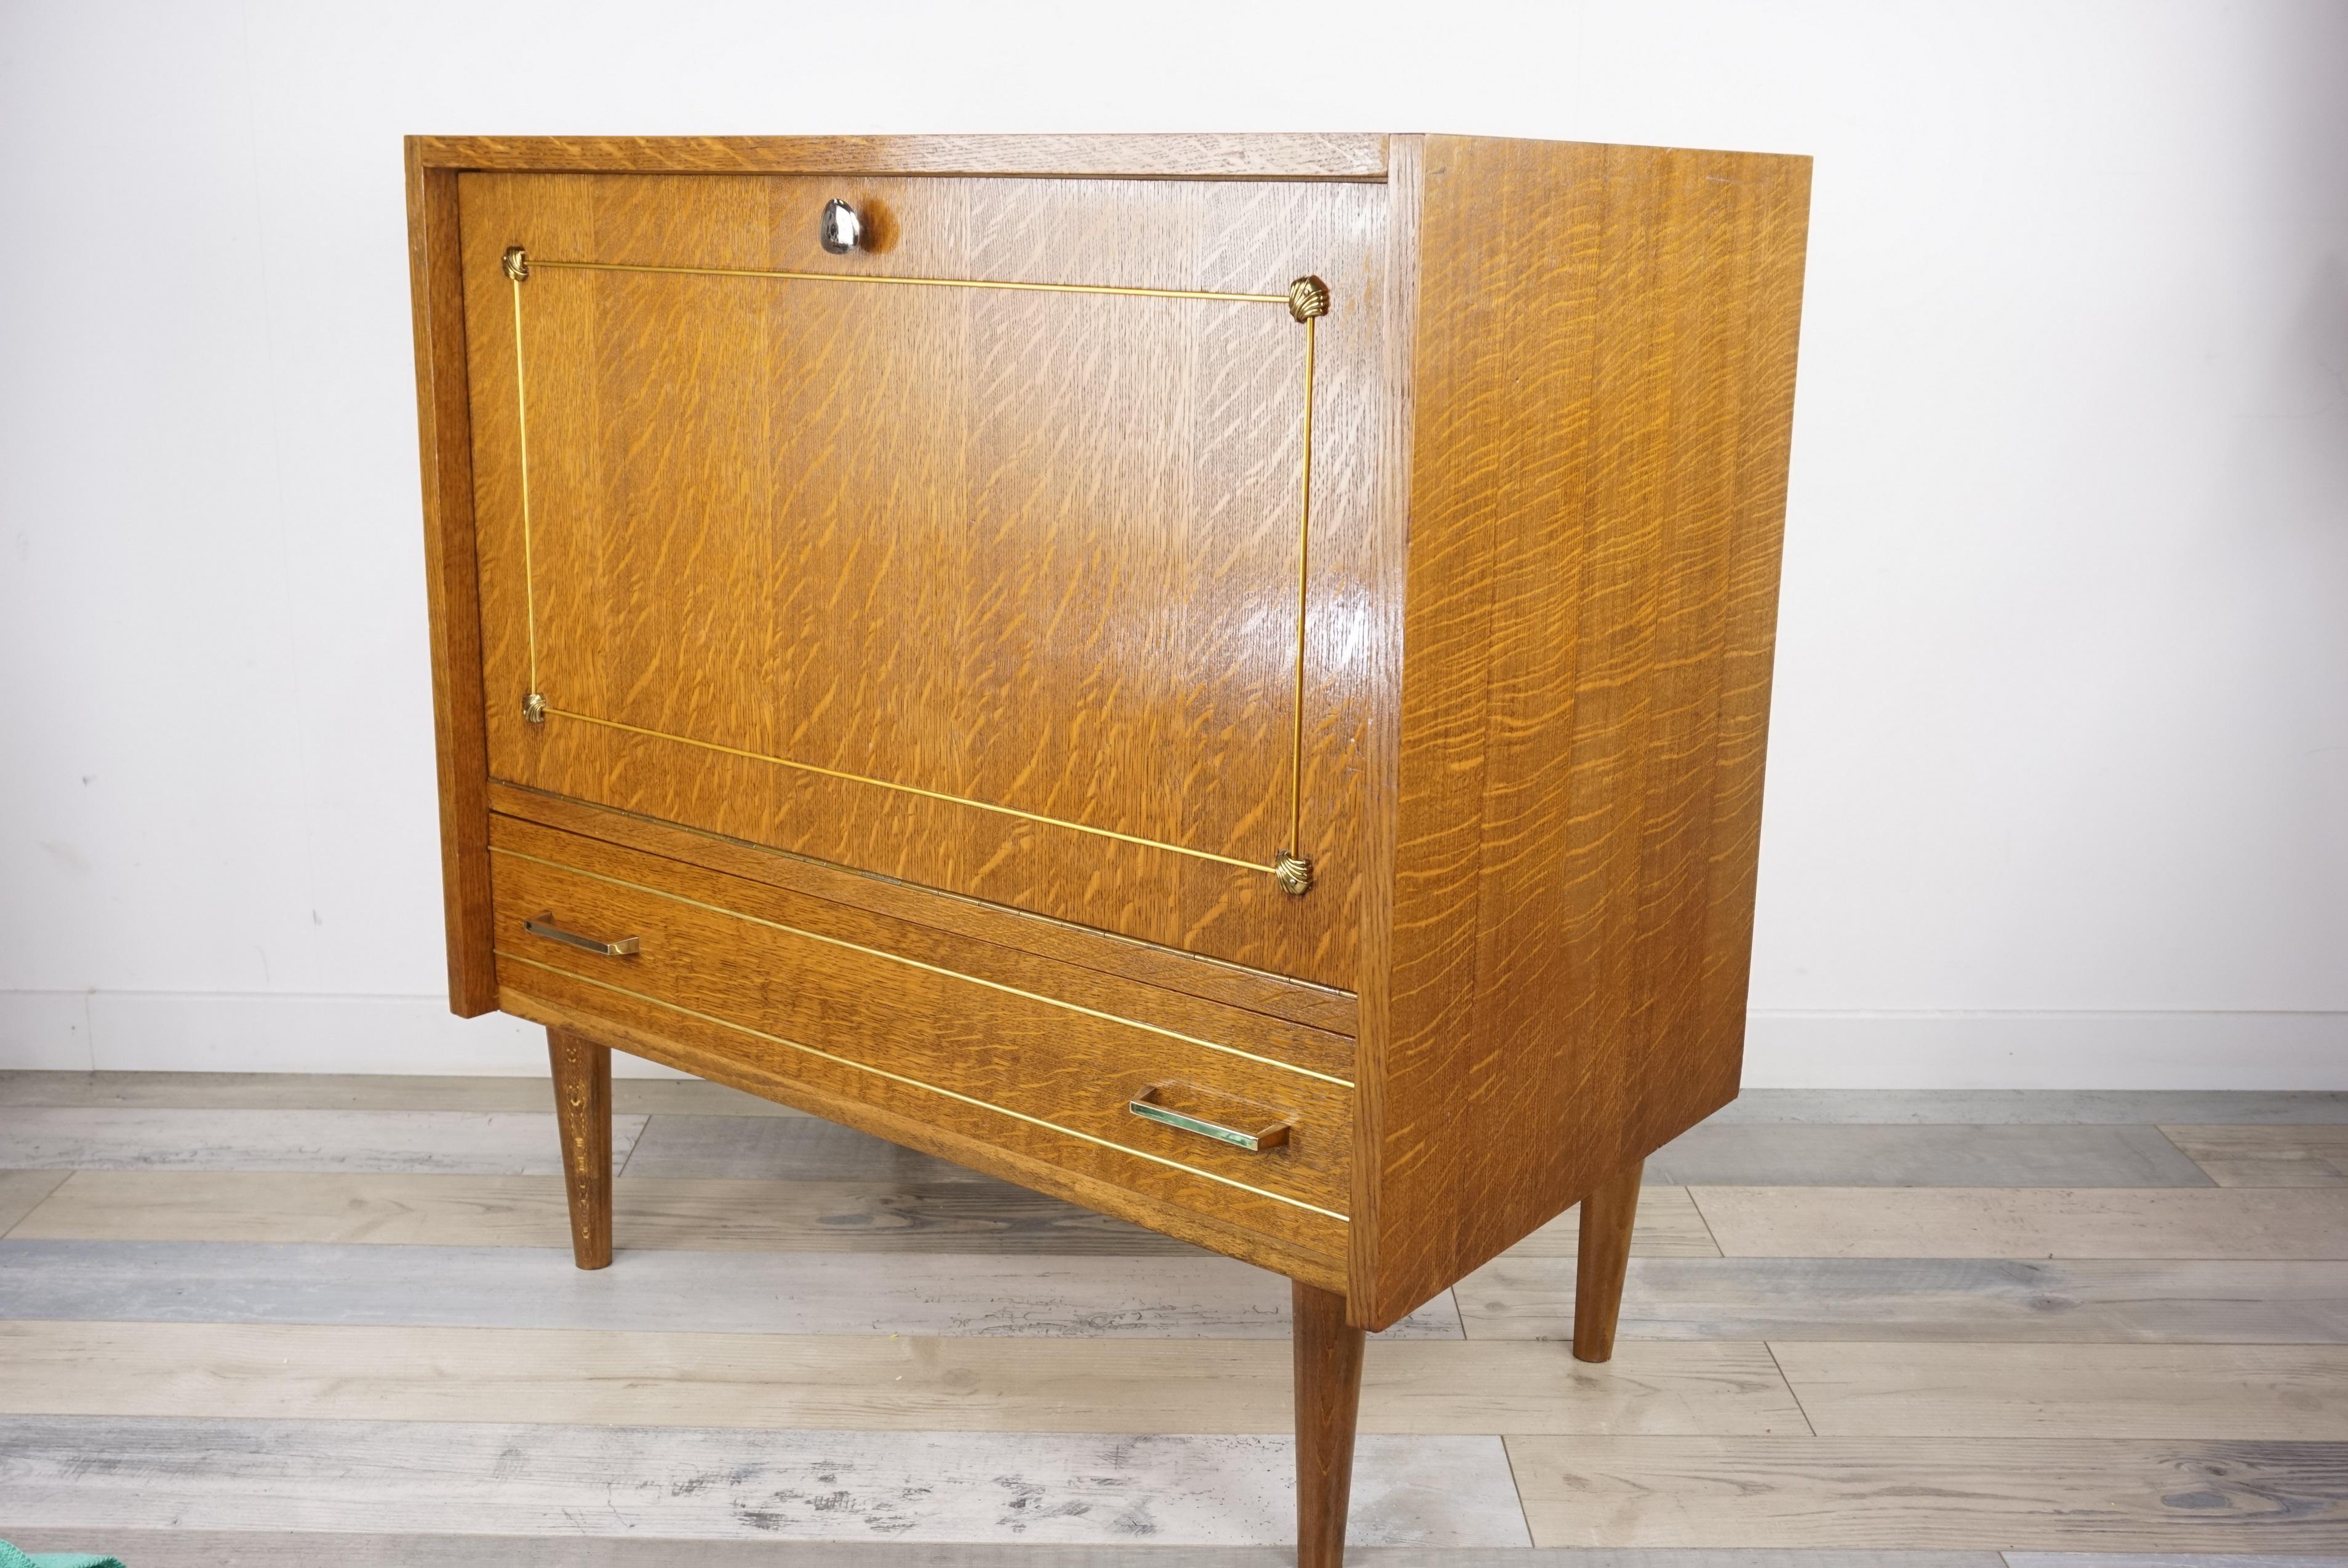 1950s -1960s, design wooden bar cabinet, adorable, practical and vintage look; it is composed of an oak structure called 